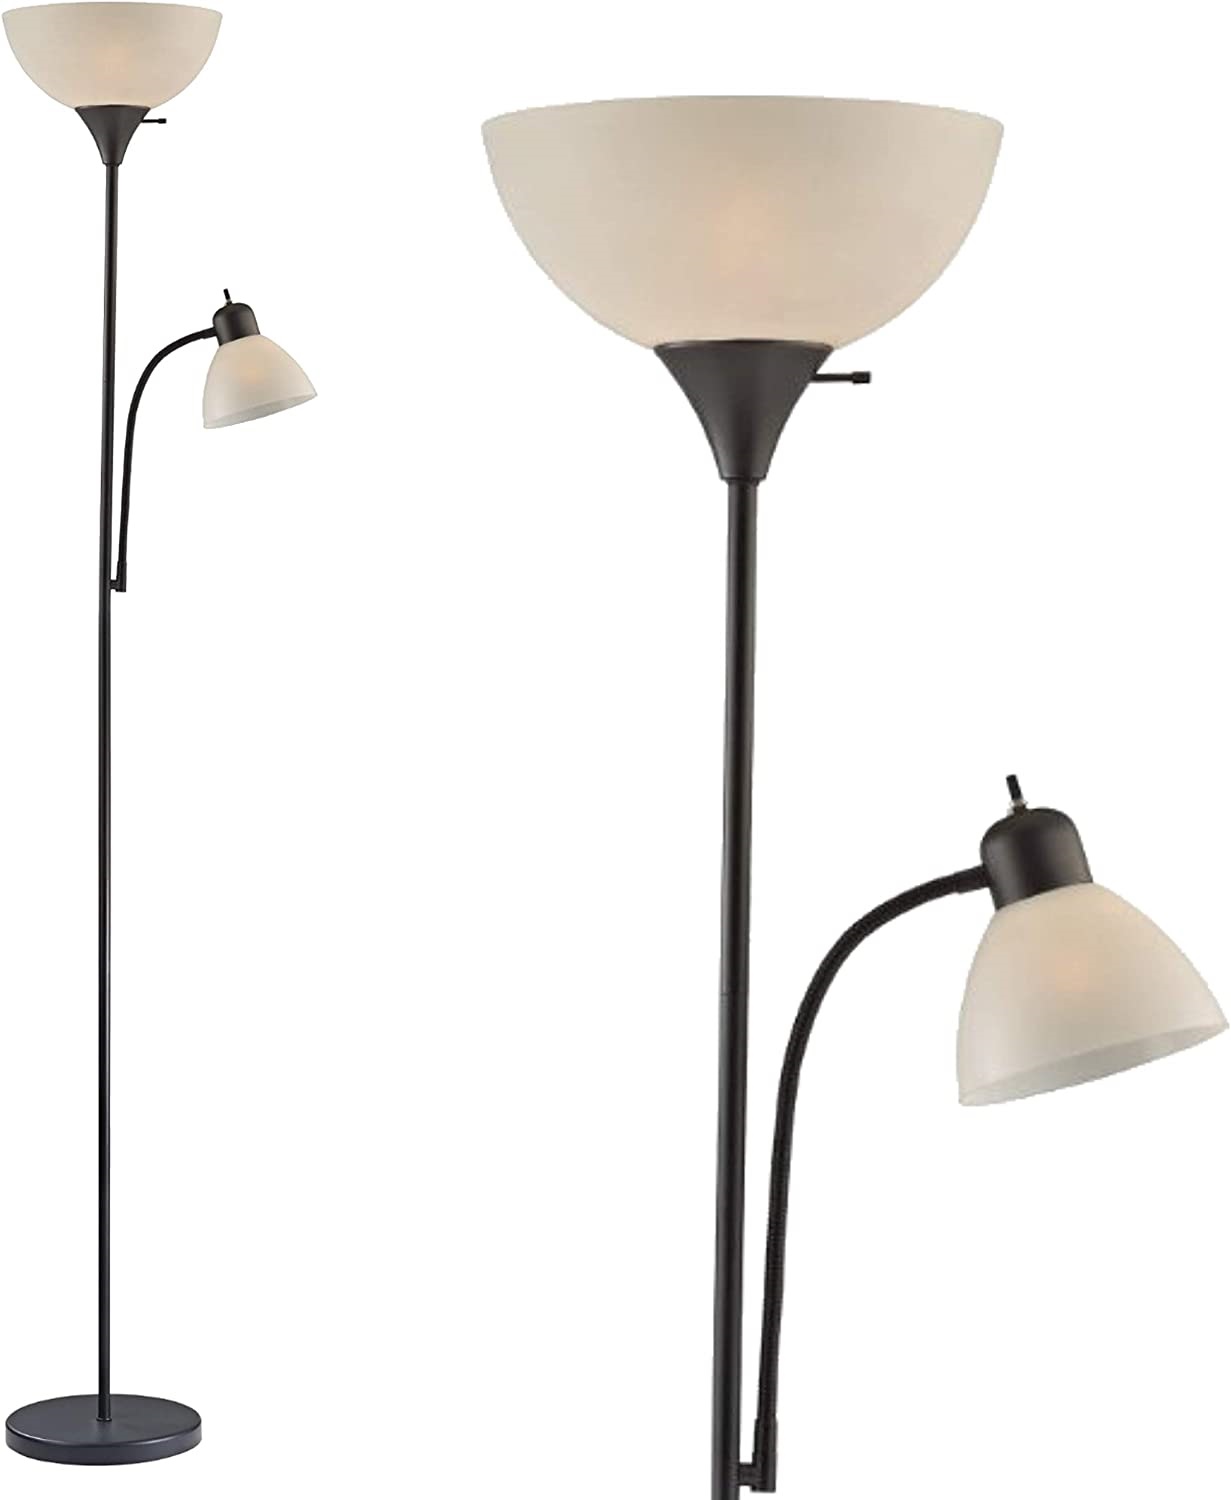 Adjustable Black Floor Lamp with Reading Light by LIGHTACCENTS